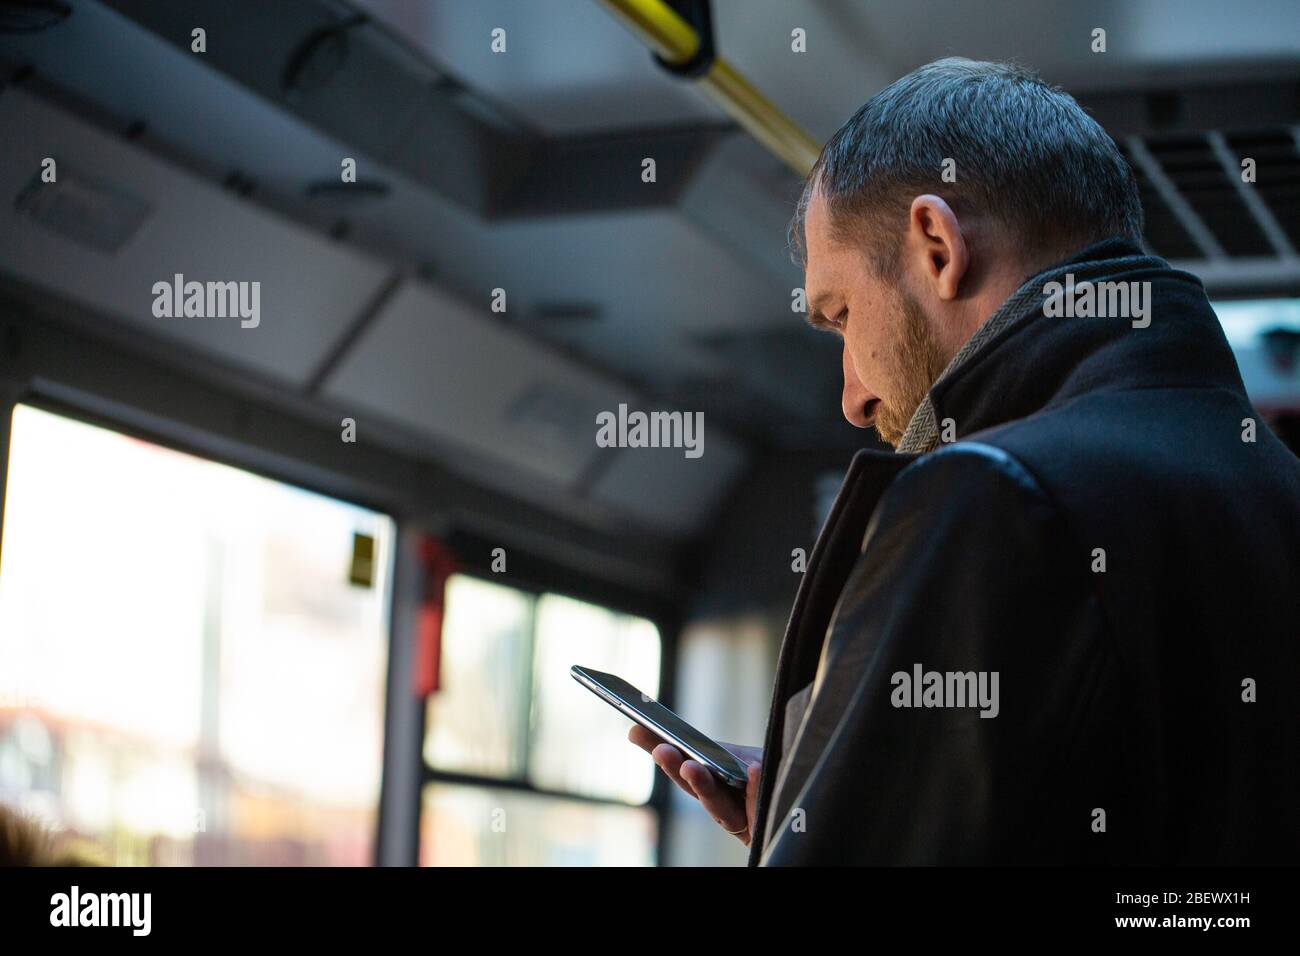 Vladivostok, Russia, March 24, 2020: a white man stands in a bus with a phone in his hands Stock Photo